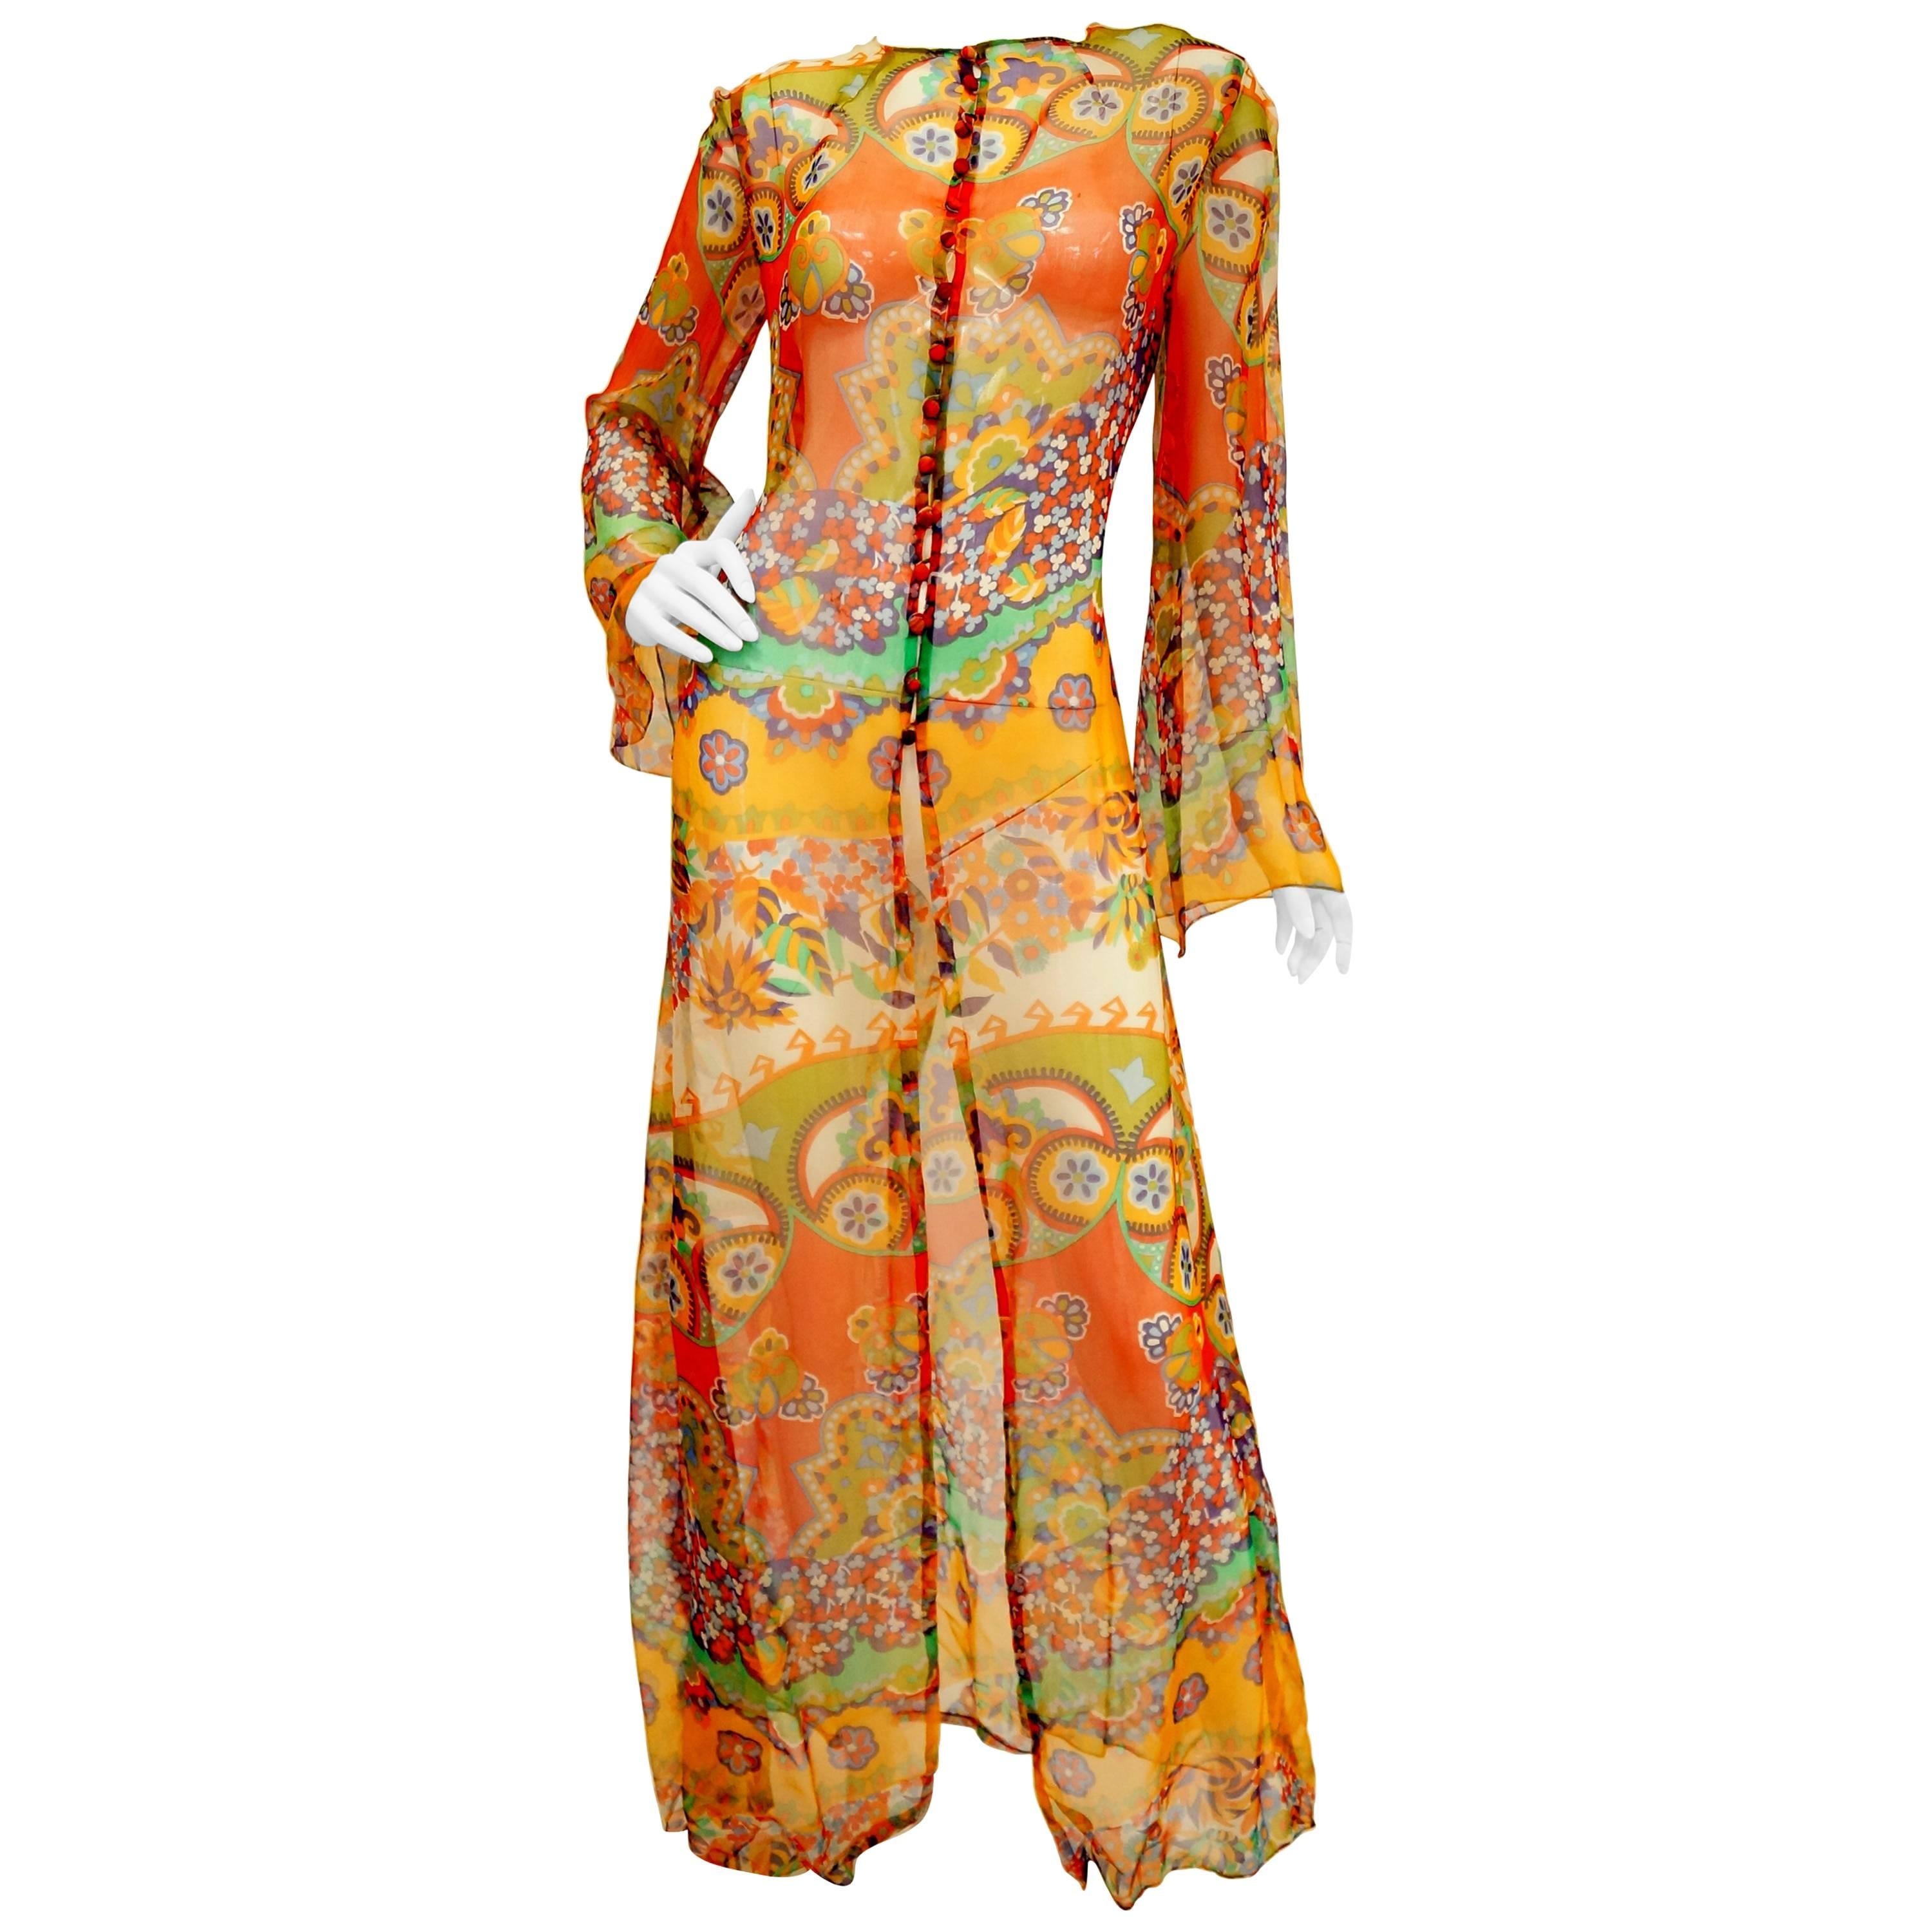 1970s Sheer Polychrome Psychedelic Floral Boho Caftan/Tunic /Cover Up